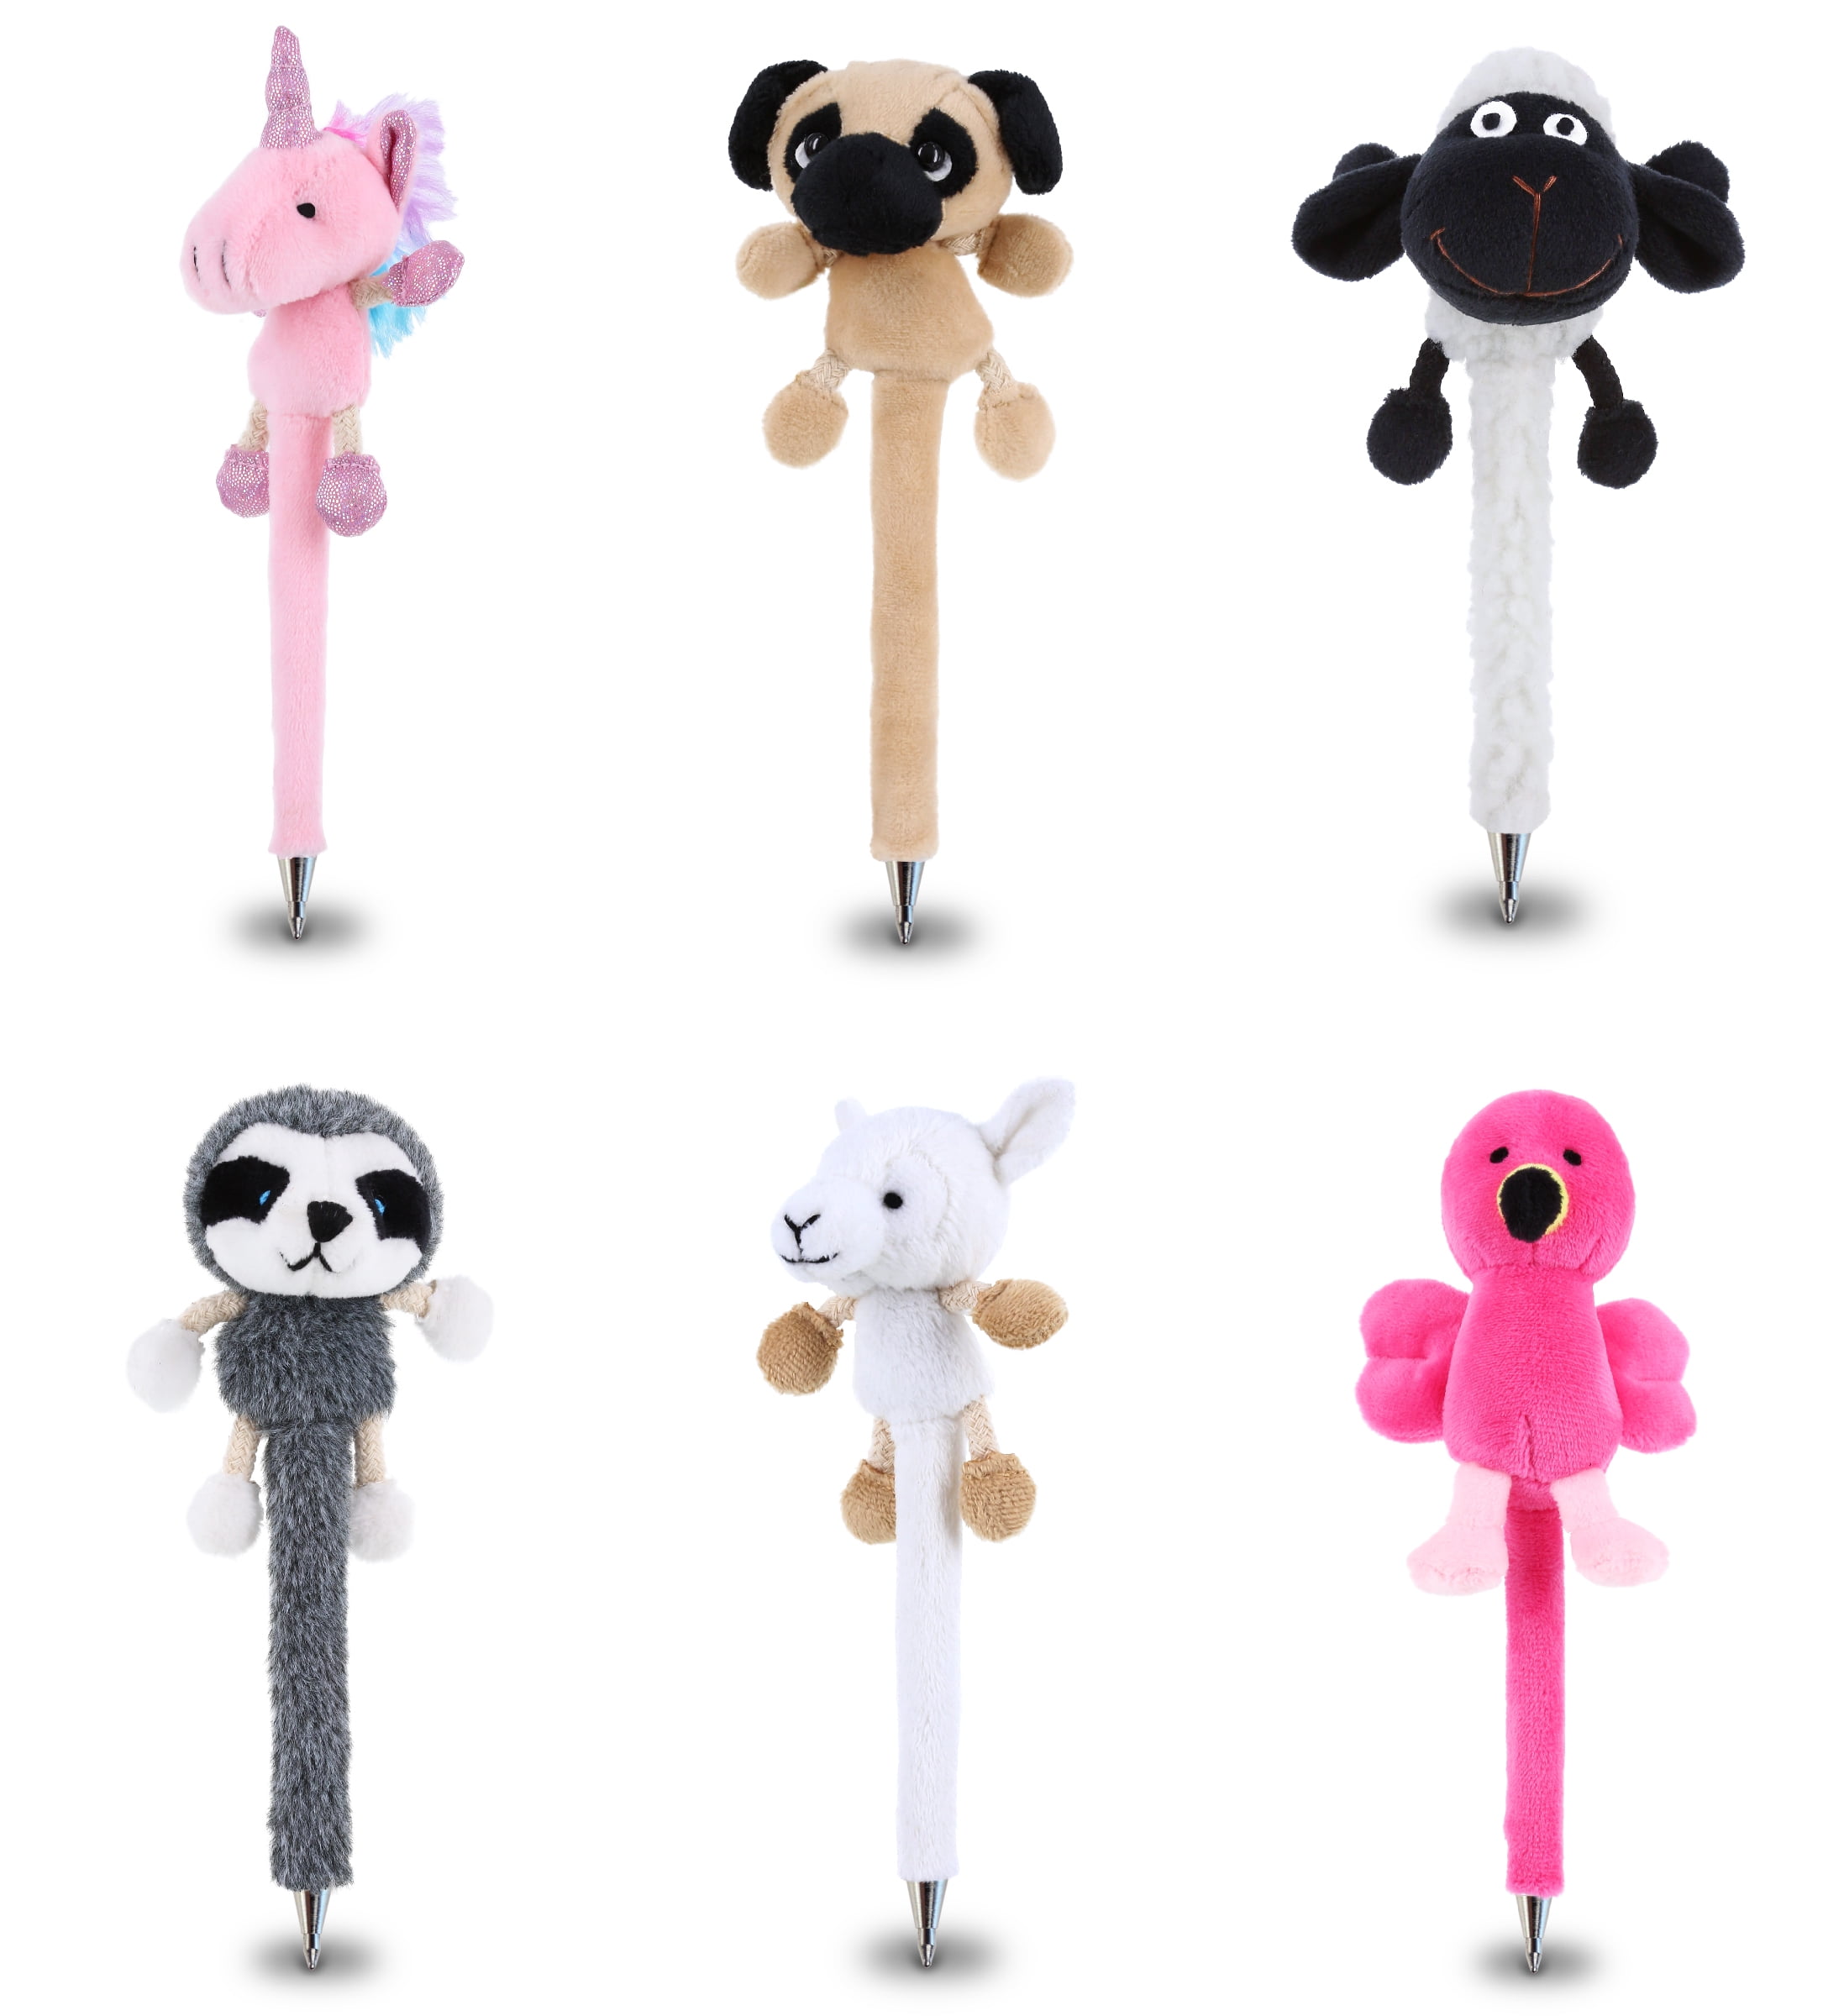 DolliBu Cool Animals Plush Pens Kit - Cute & Soft Stuffed Animal Ballpoint  Novelty Pen Toys, Unique Writing Instruments for Cool Stationery School,  Office Desk Accessories for Kids & Adults - 6